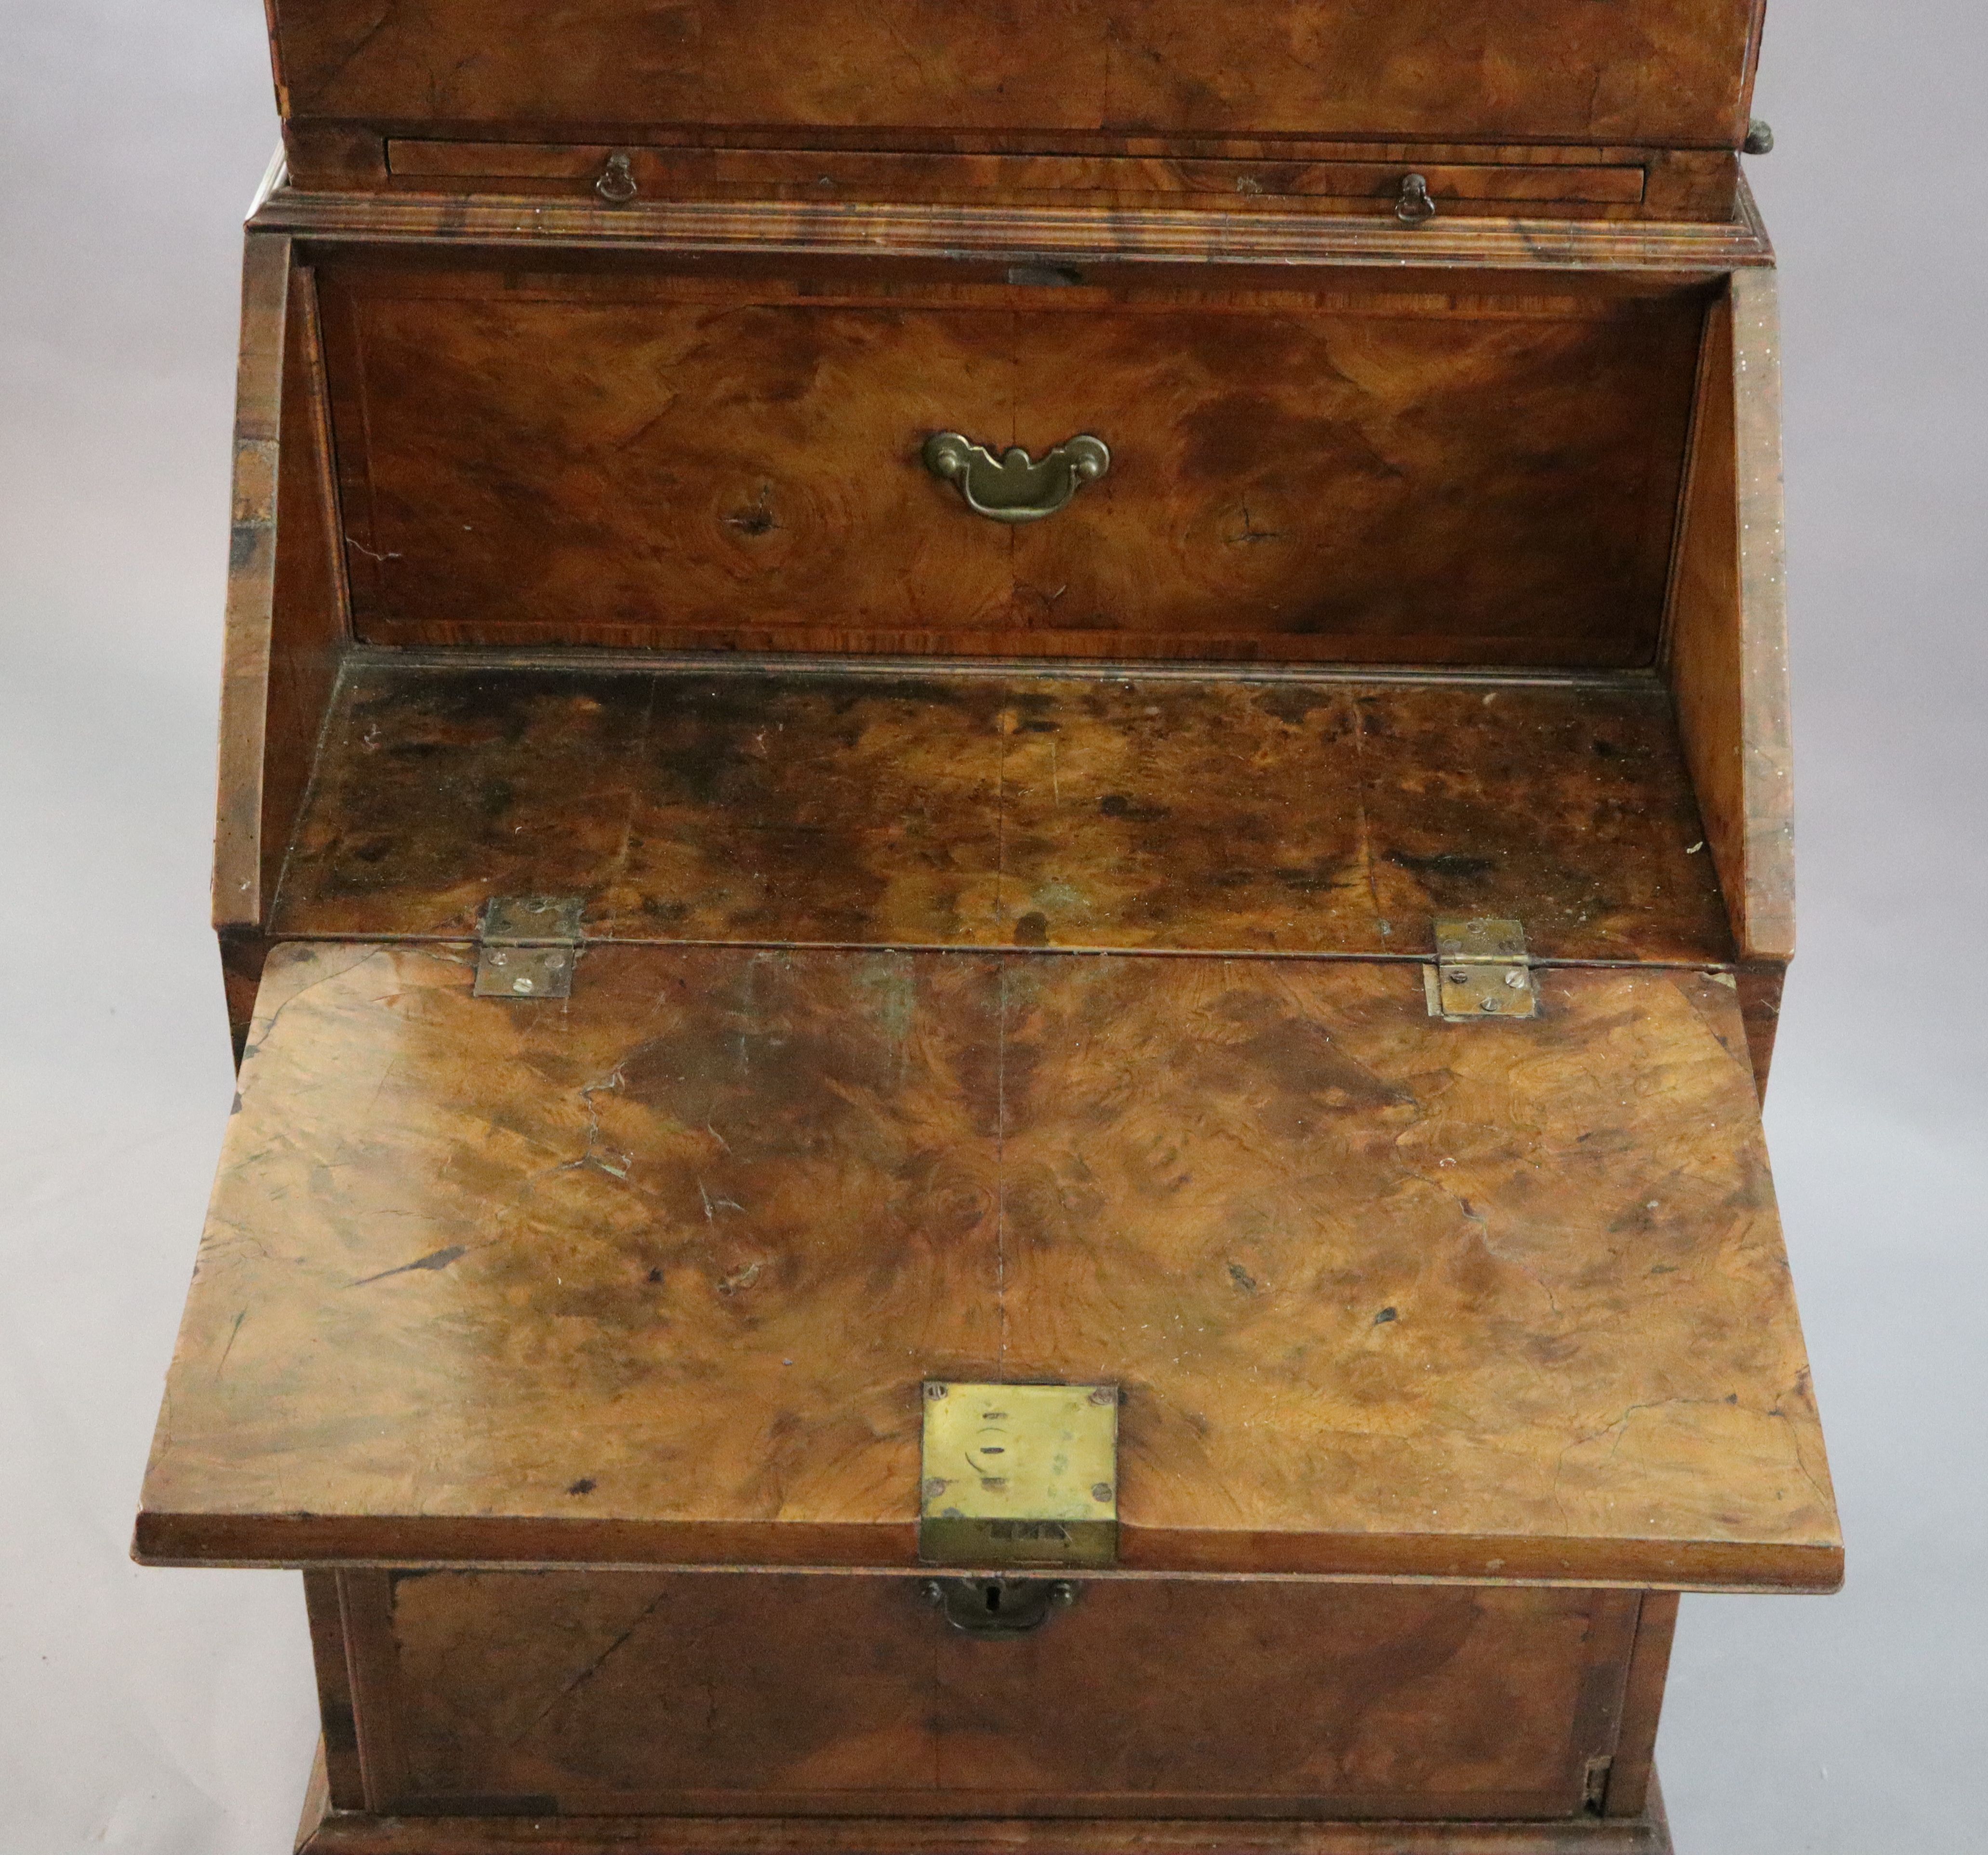 An early 18th century banded walnut bureau bookcase W. 2ft 4in. H. 6ft 6in. D. 1ft 8in.